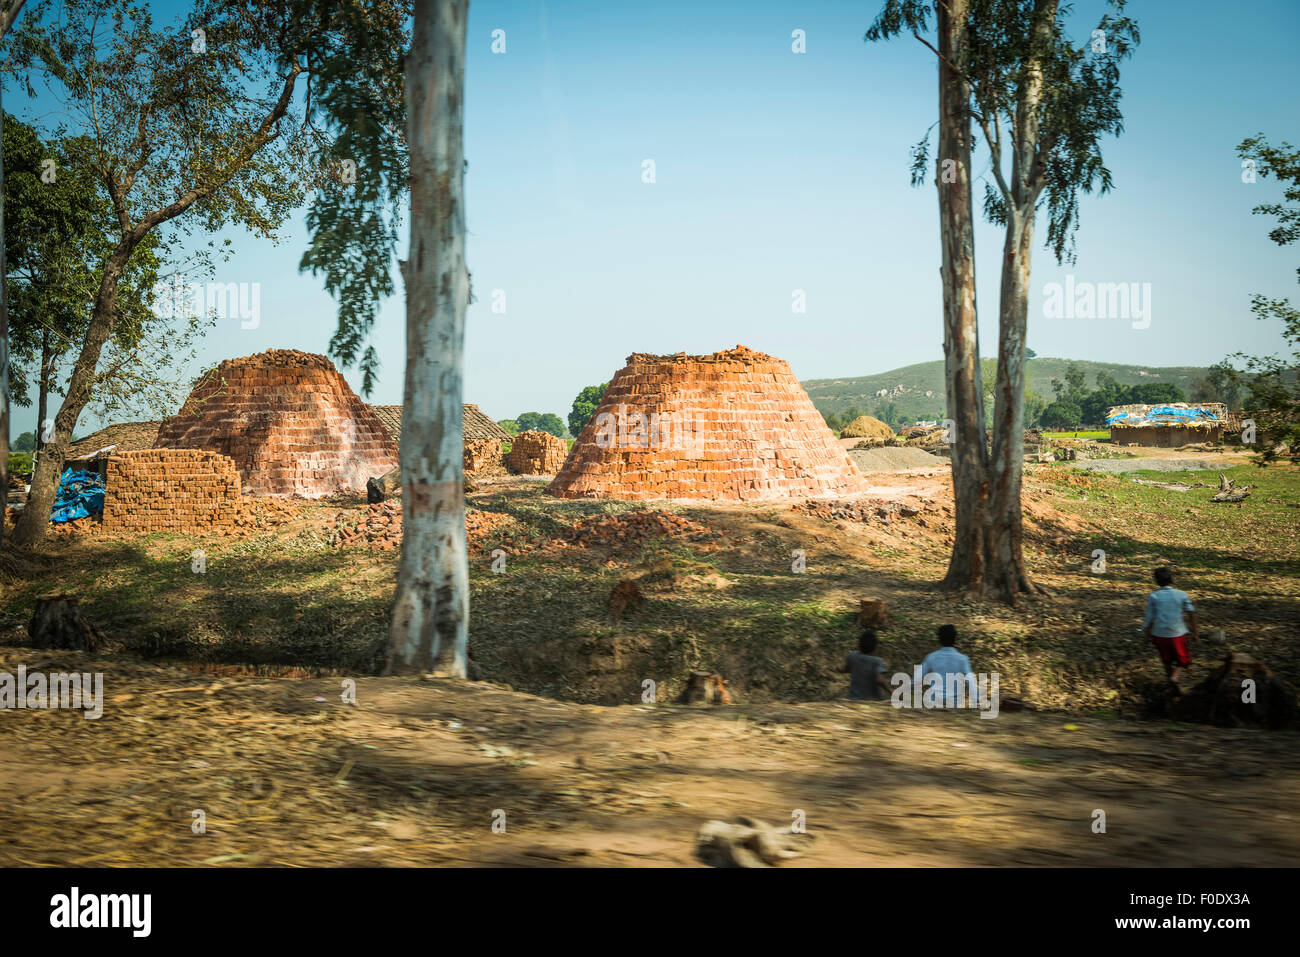 Piles of newly baked bricks waiting to be used along a roadside in India Stock Photo